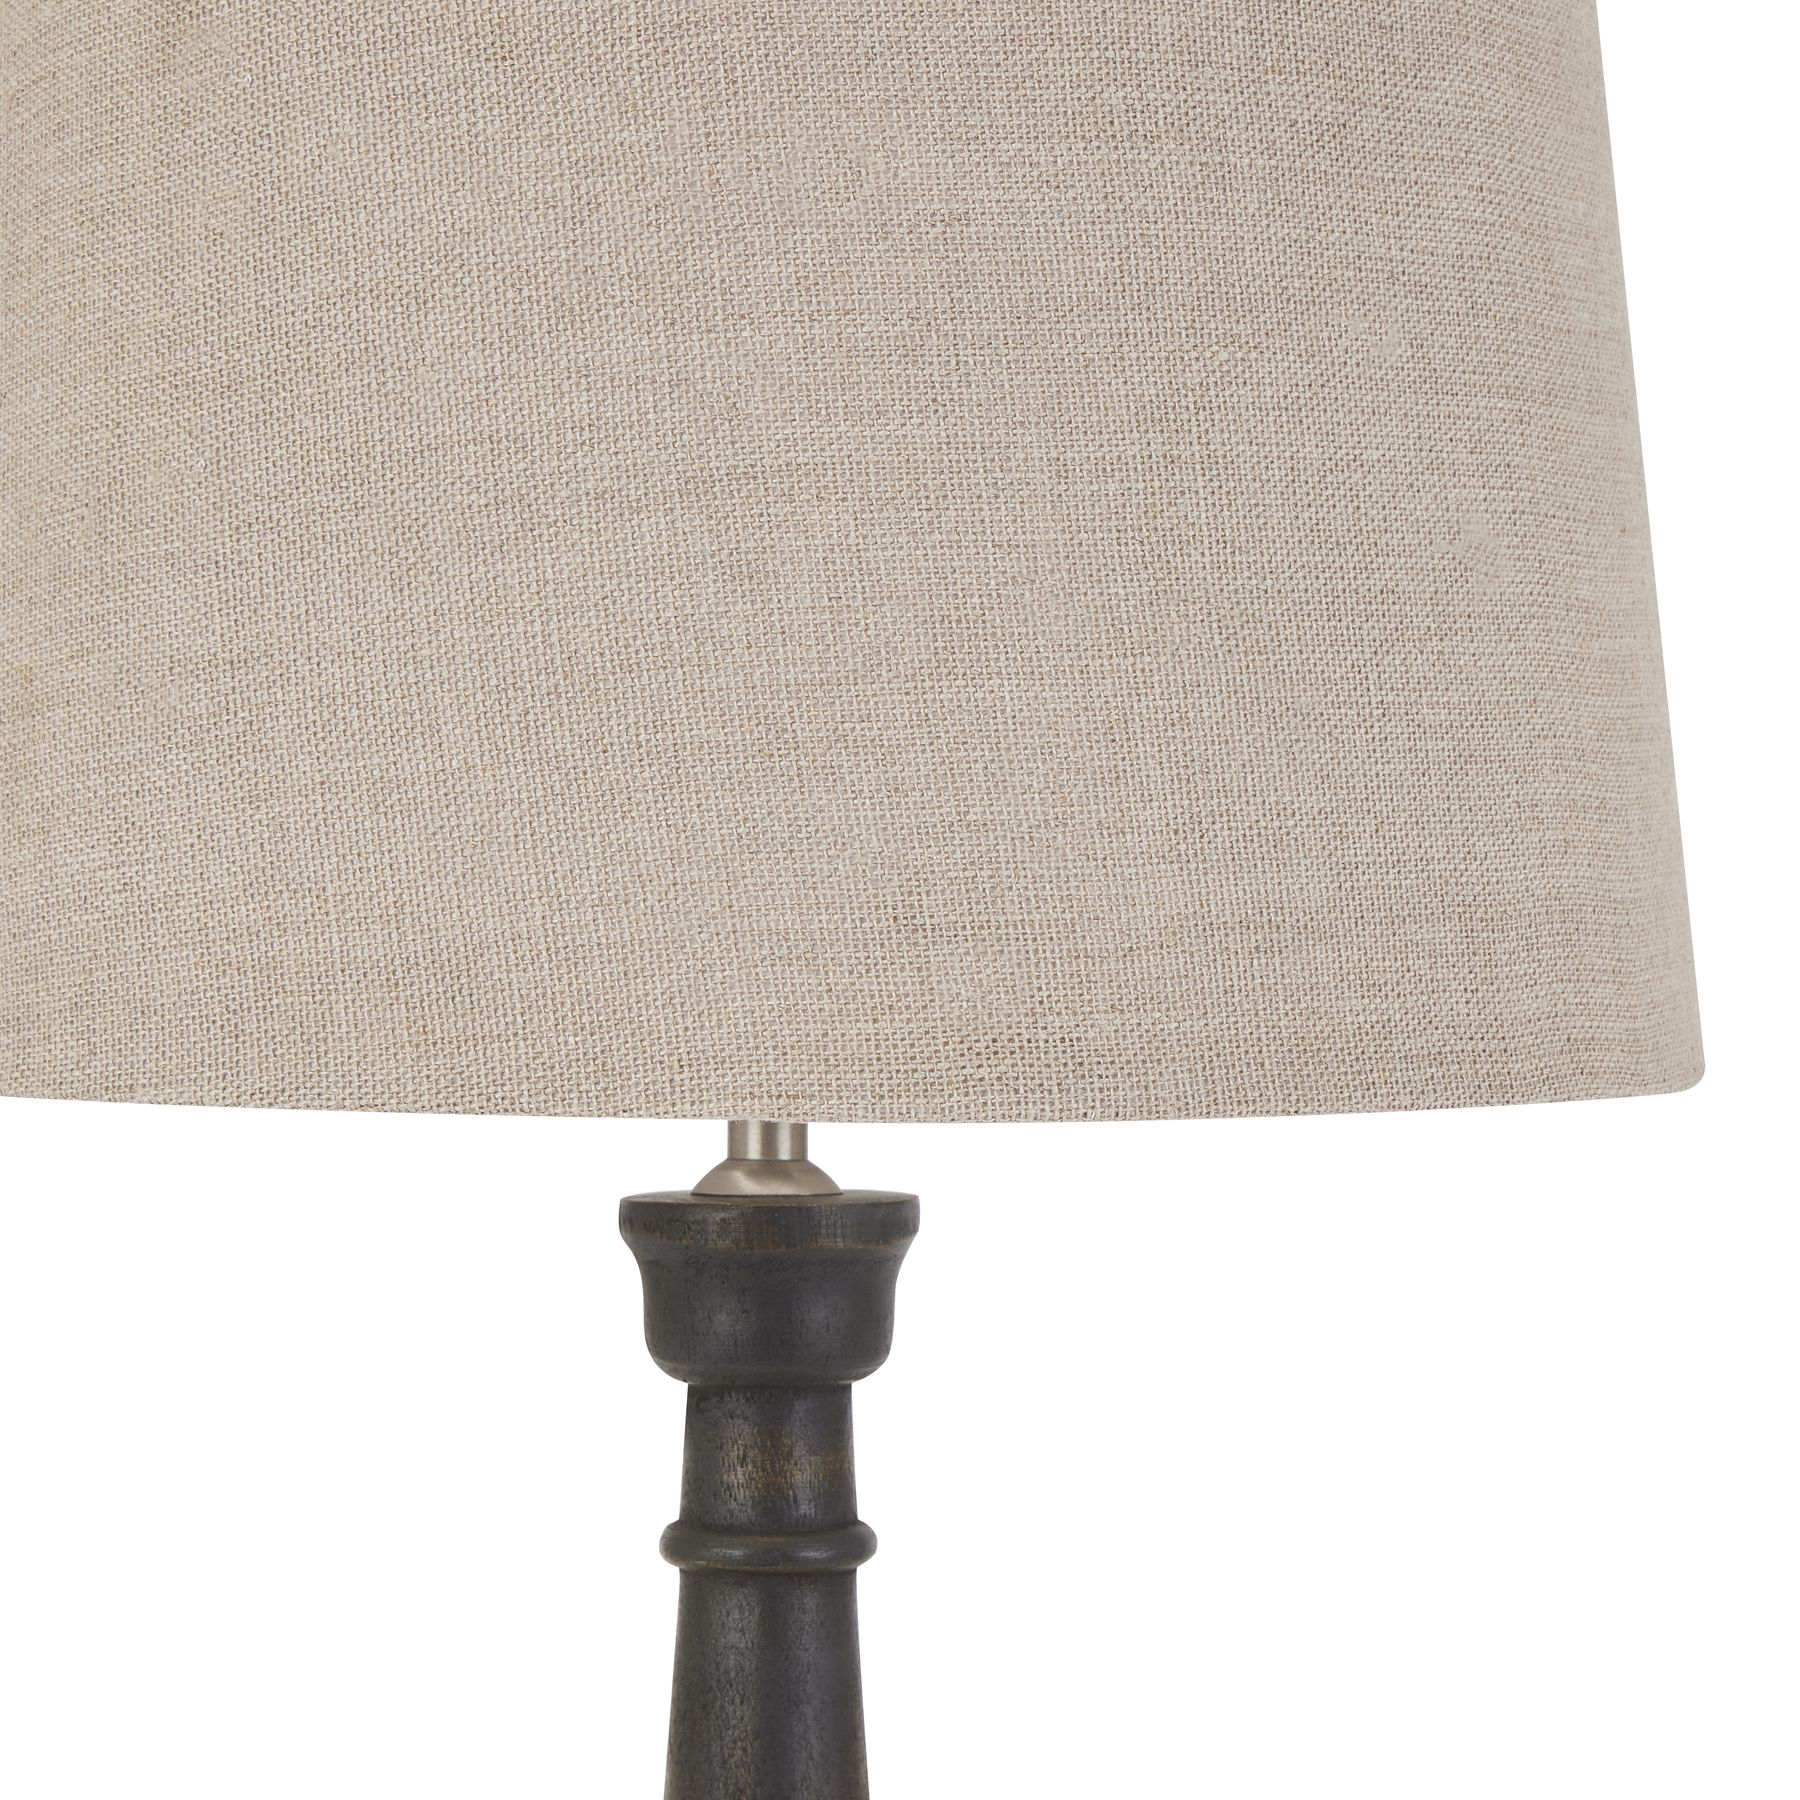 Delaney Grey Bead Candlestick Lamp With Linen Shade - Image 2